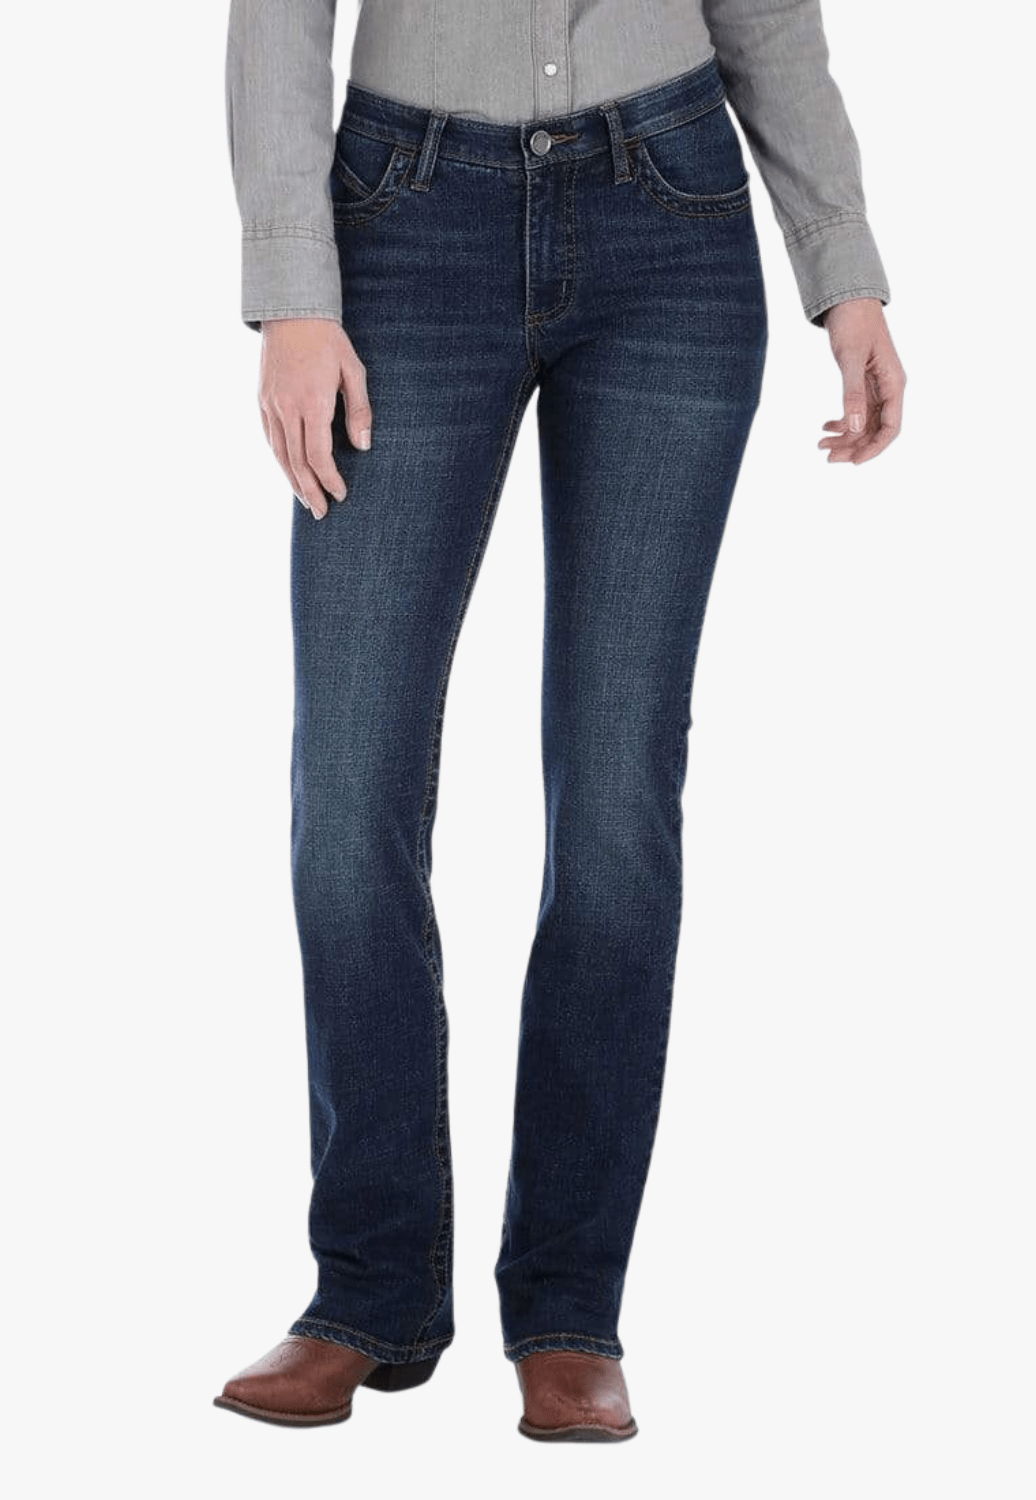 Wrangler Womens Willow Ultimate Riding Jean - W. Titley & Co